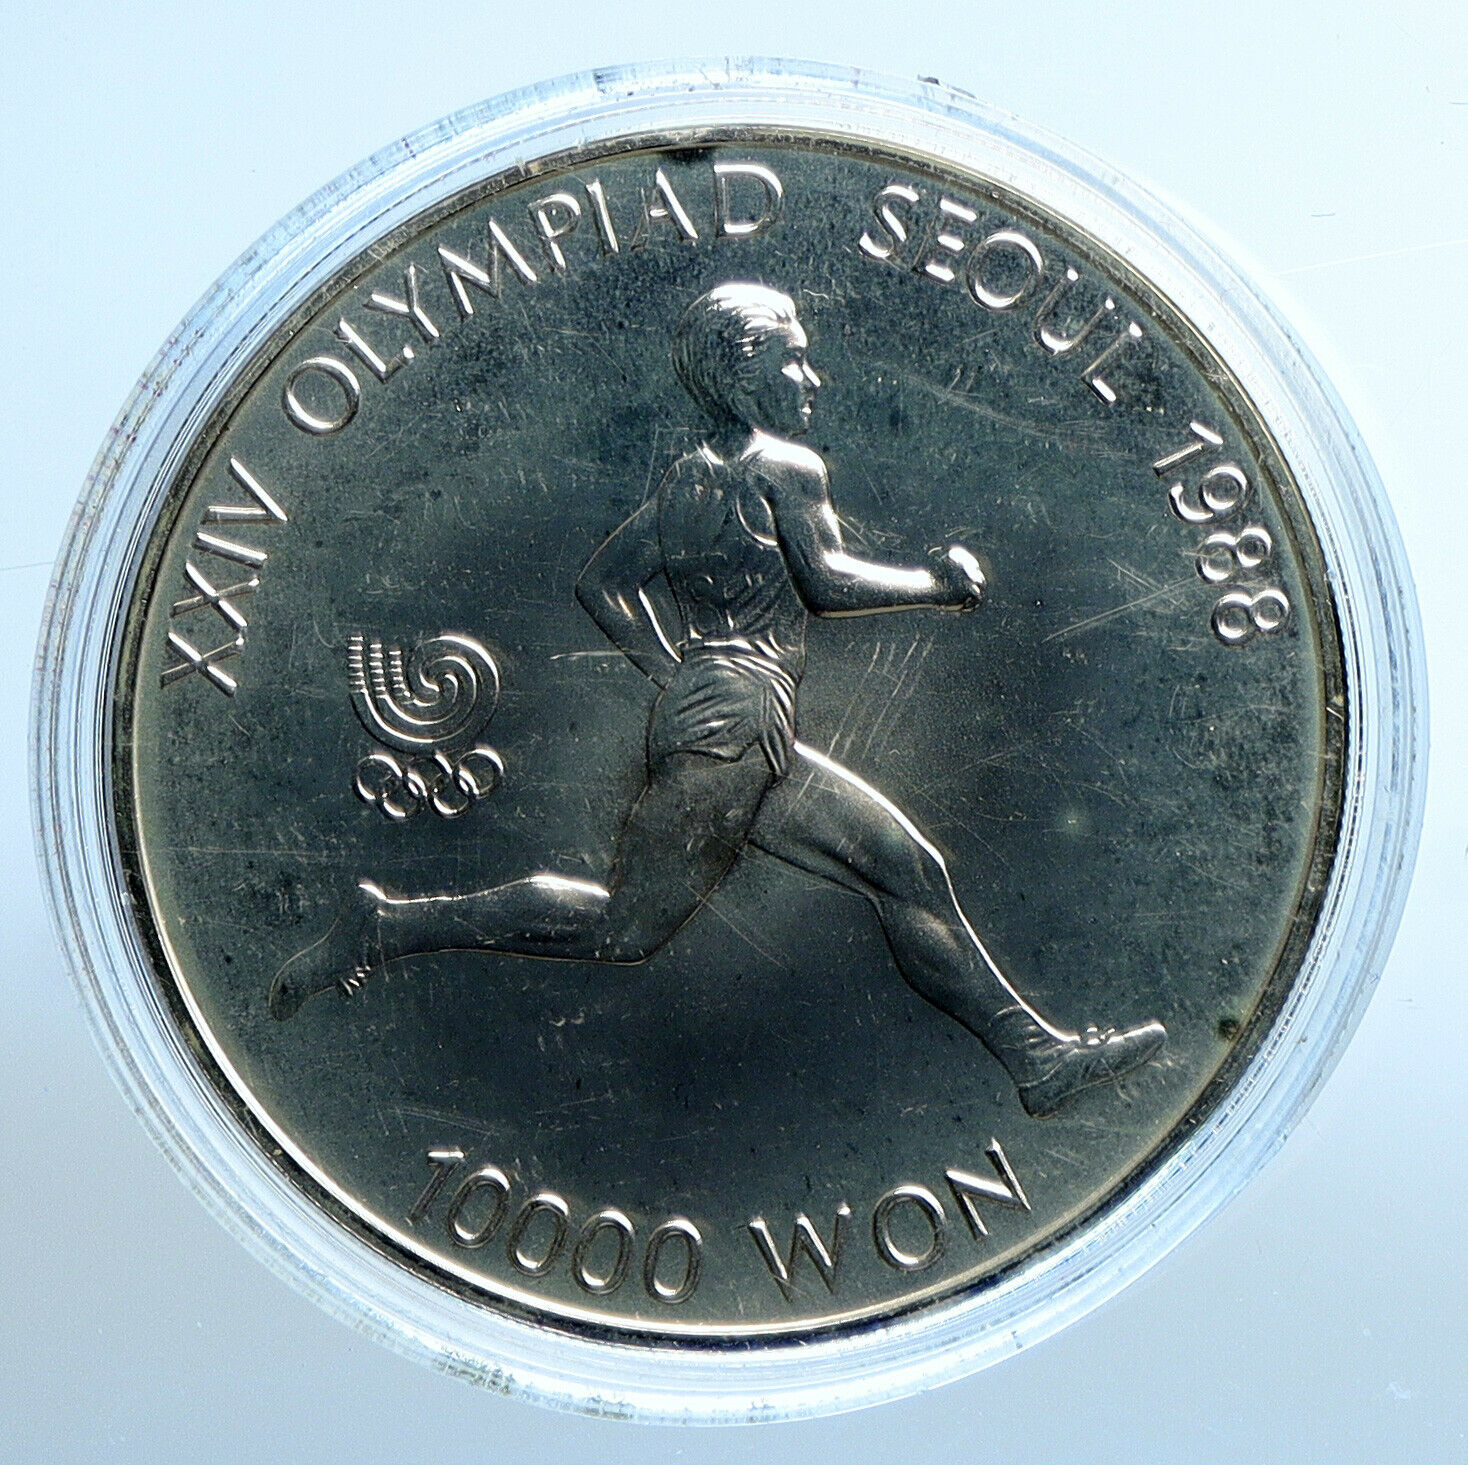 1986 SOUTH KOREA Seoul OLYMPIC Runner Track OLD Silver 10000 Won Coin i111173